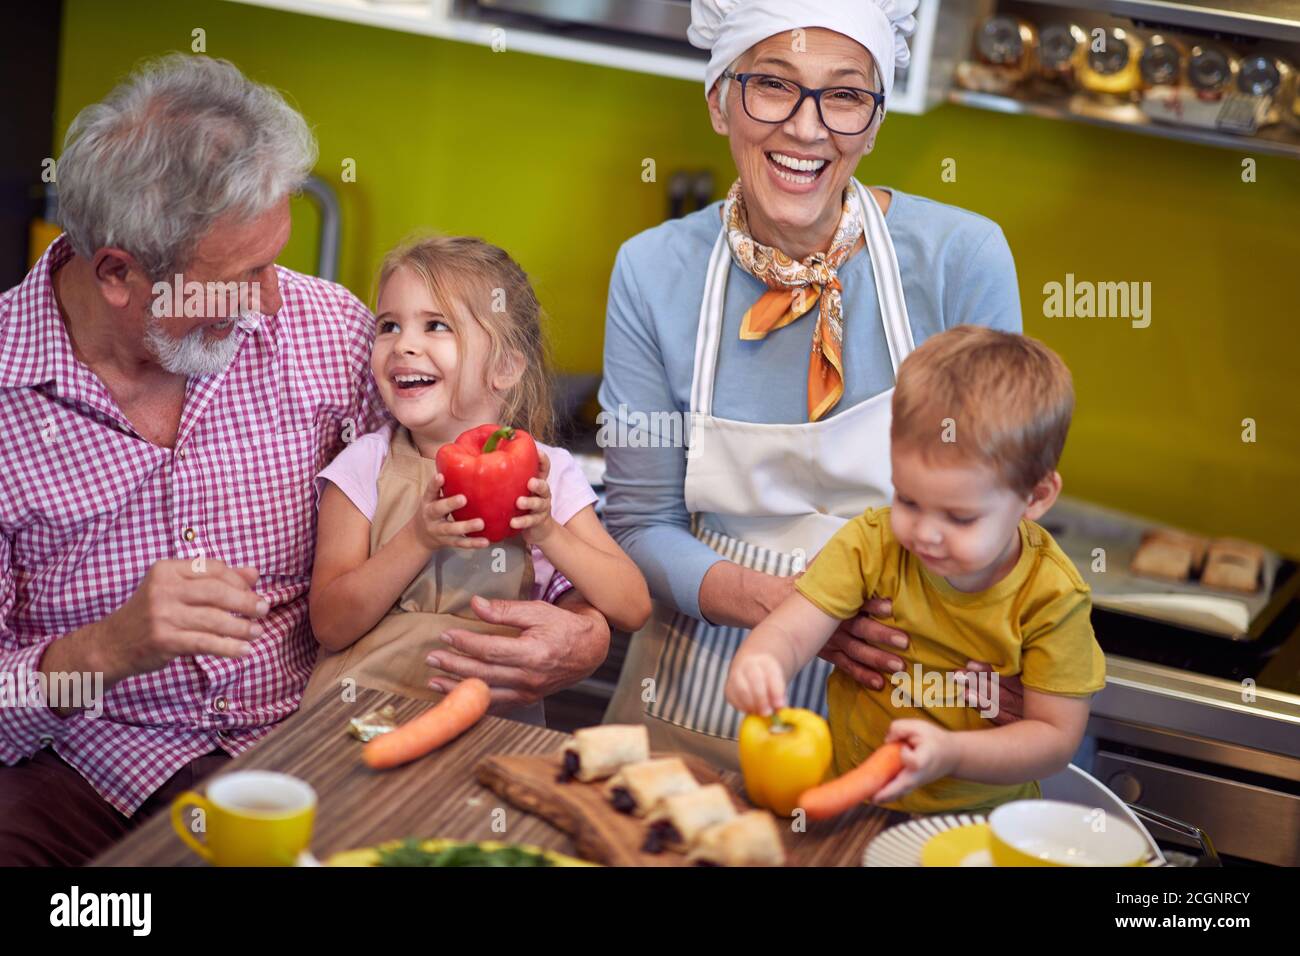 top view of grandparents enjoying with their grandchildren in the kitchen, laughing Stock Photo